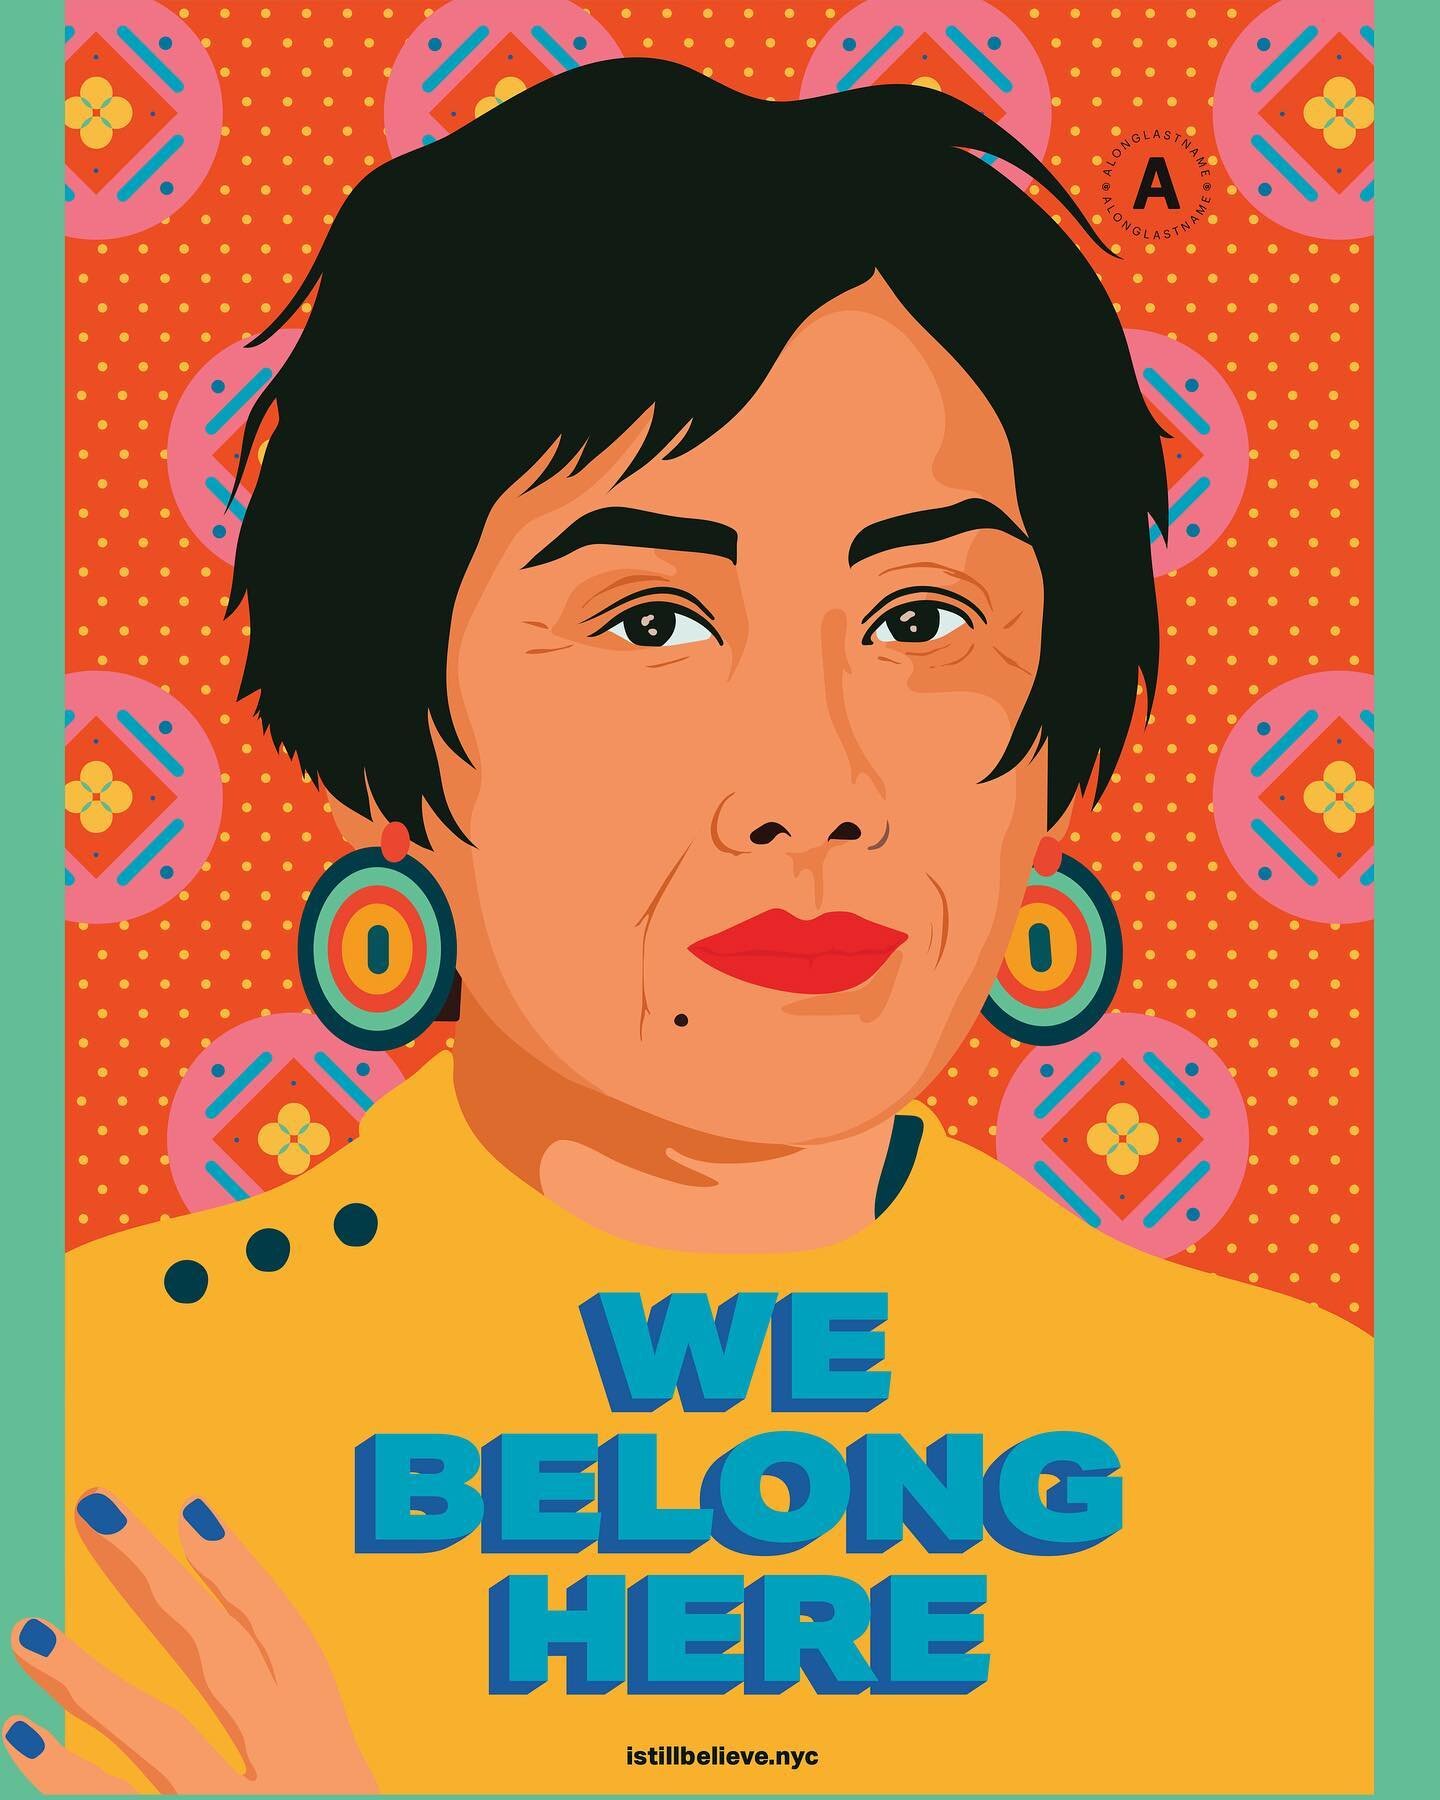 Continuing to celebrate Asian American and Pacific Islander Heritage Month! Here are some of @alonglastname Amanda Phingbodhipakkiya&rsquo;s &ldquo;We Are More&rdquo; and &ldquo;I still Believe&rdquo; posters.